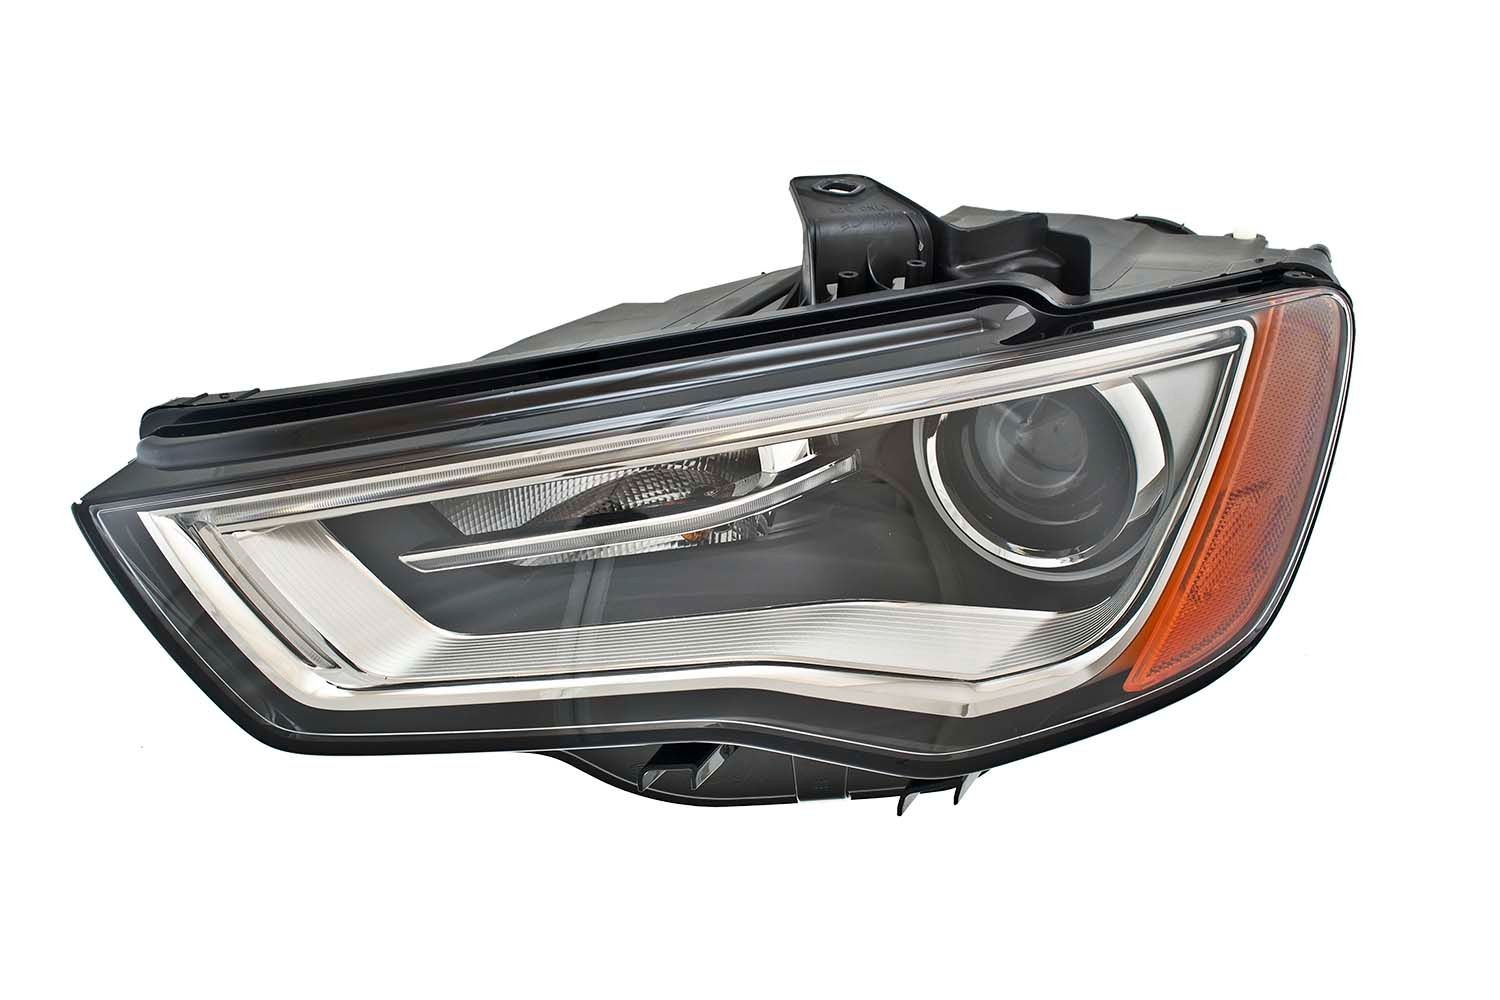 HELLA 1EL 010 740-351 Head lights Left, LED, D3S, PSY24W, LED, Bi-Xenon, 12V, with side marker light, with high beam, with indicator, with position light, with reflector, with daytime running light (LED), with low beam, for right-hand traffic, without LED control unit for low beam/high beam, without LED control unit for daytime running-/position ligh, without bulb, with motor for headlamp levelling, without glow discharge lamp, without ballast